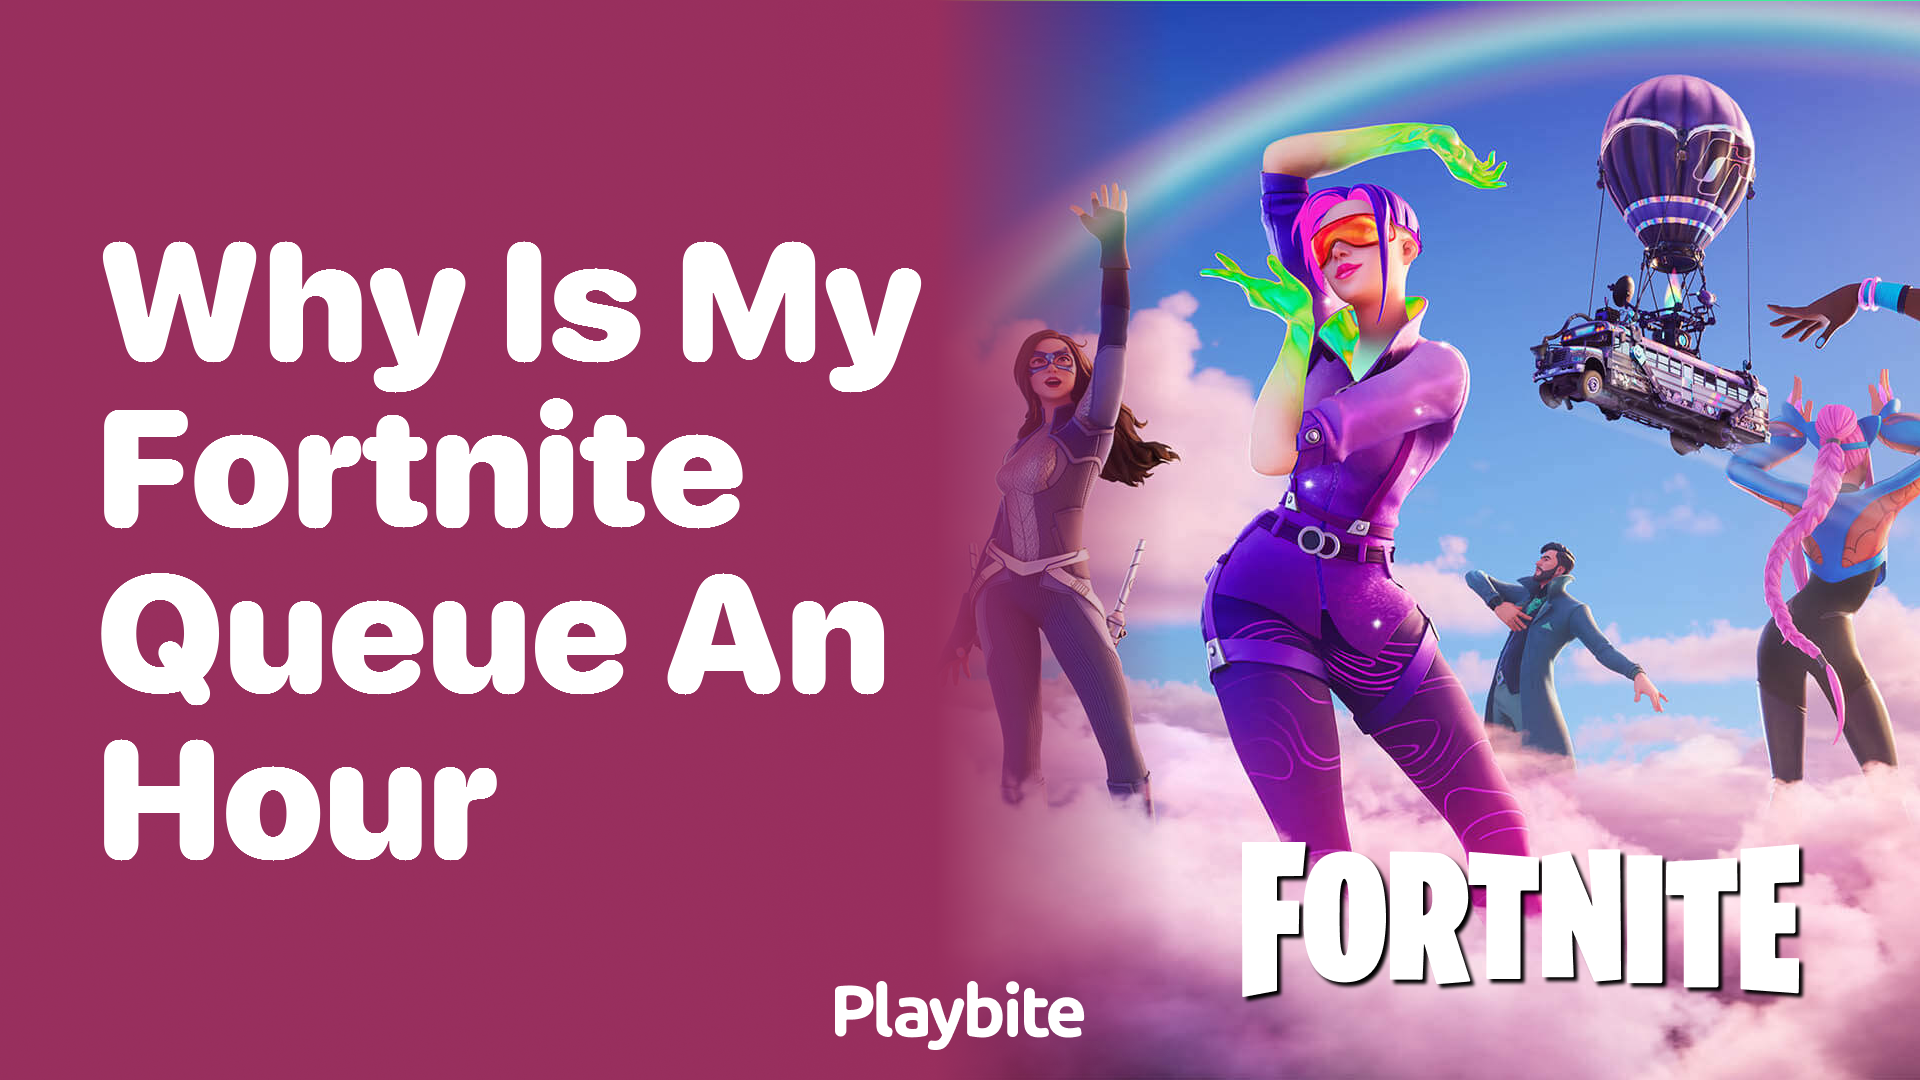 Why Is My Fortnite Queue an Hour?